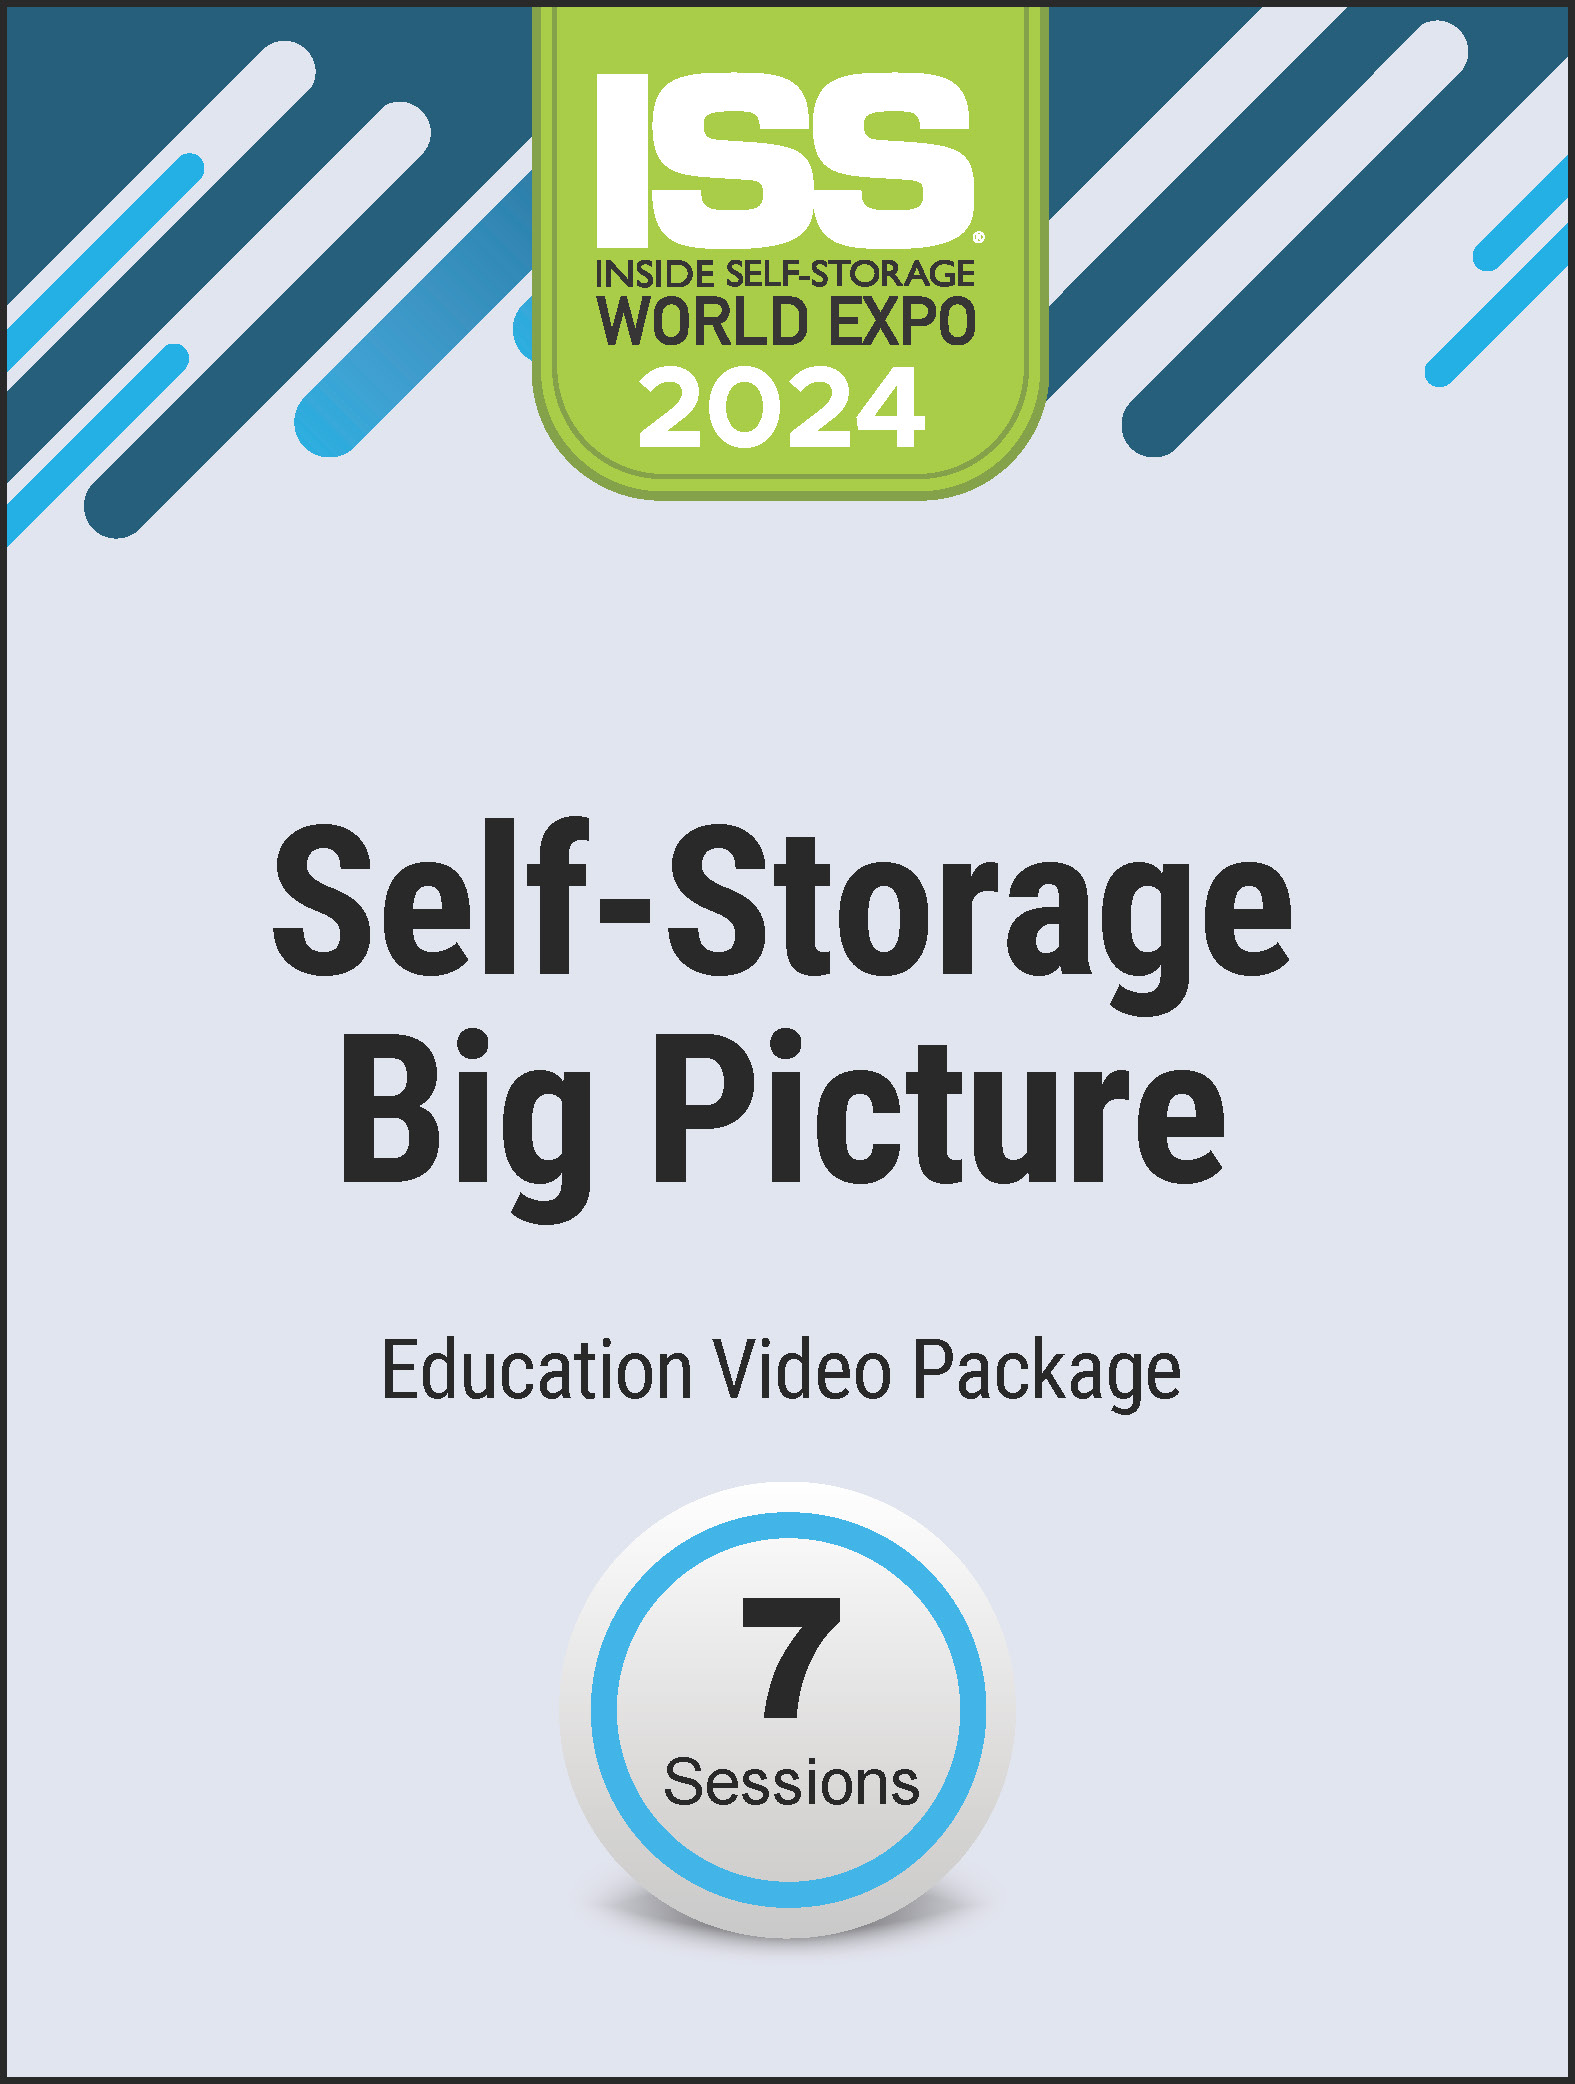 Video Pre-Order - Self-Storage Big Picture 2024 Education Video Package